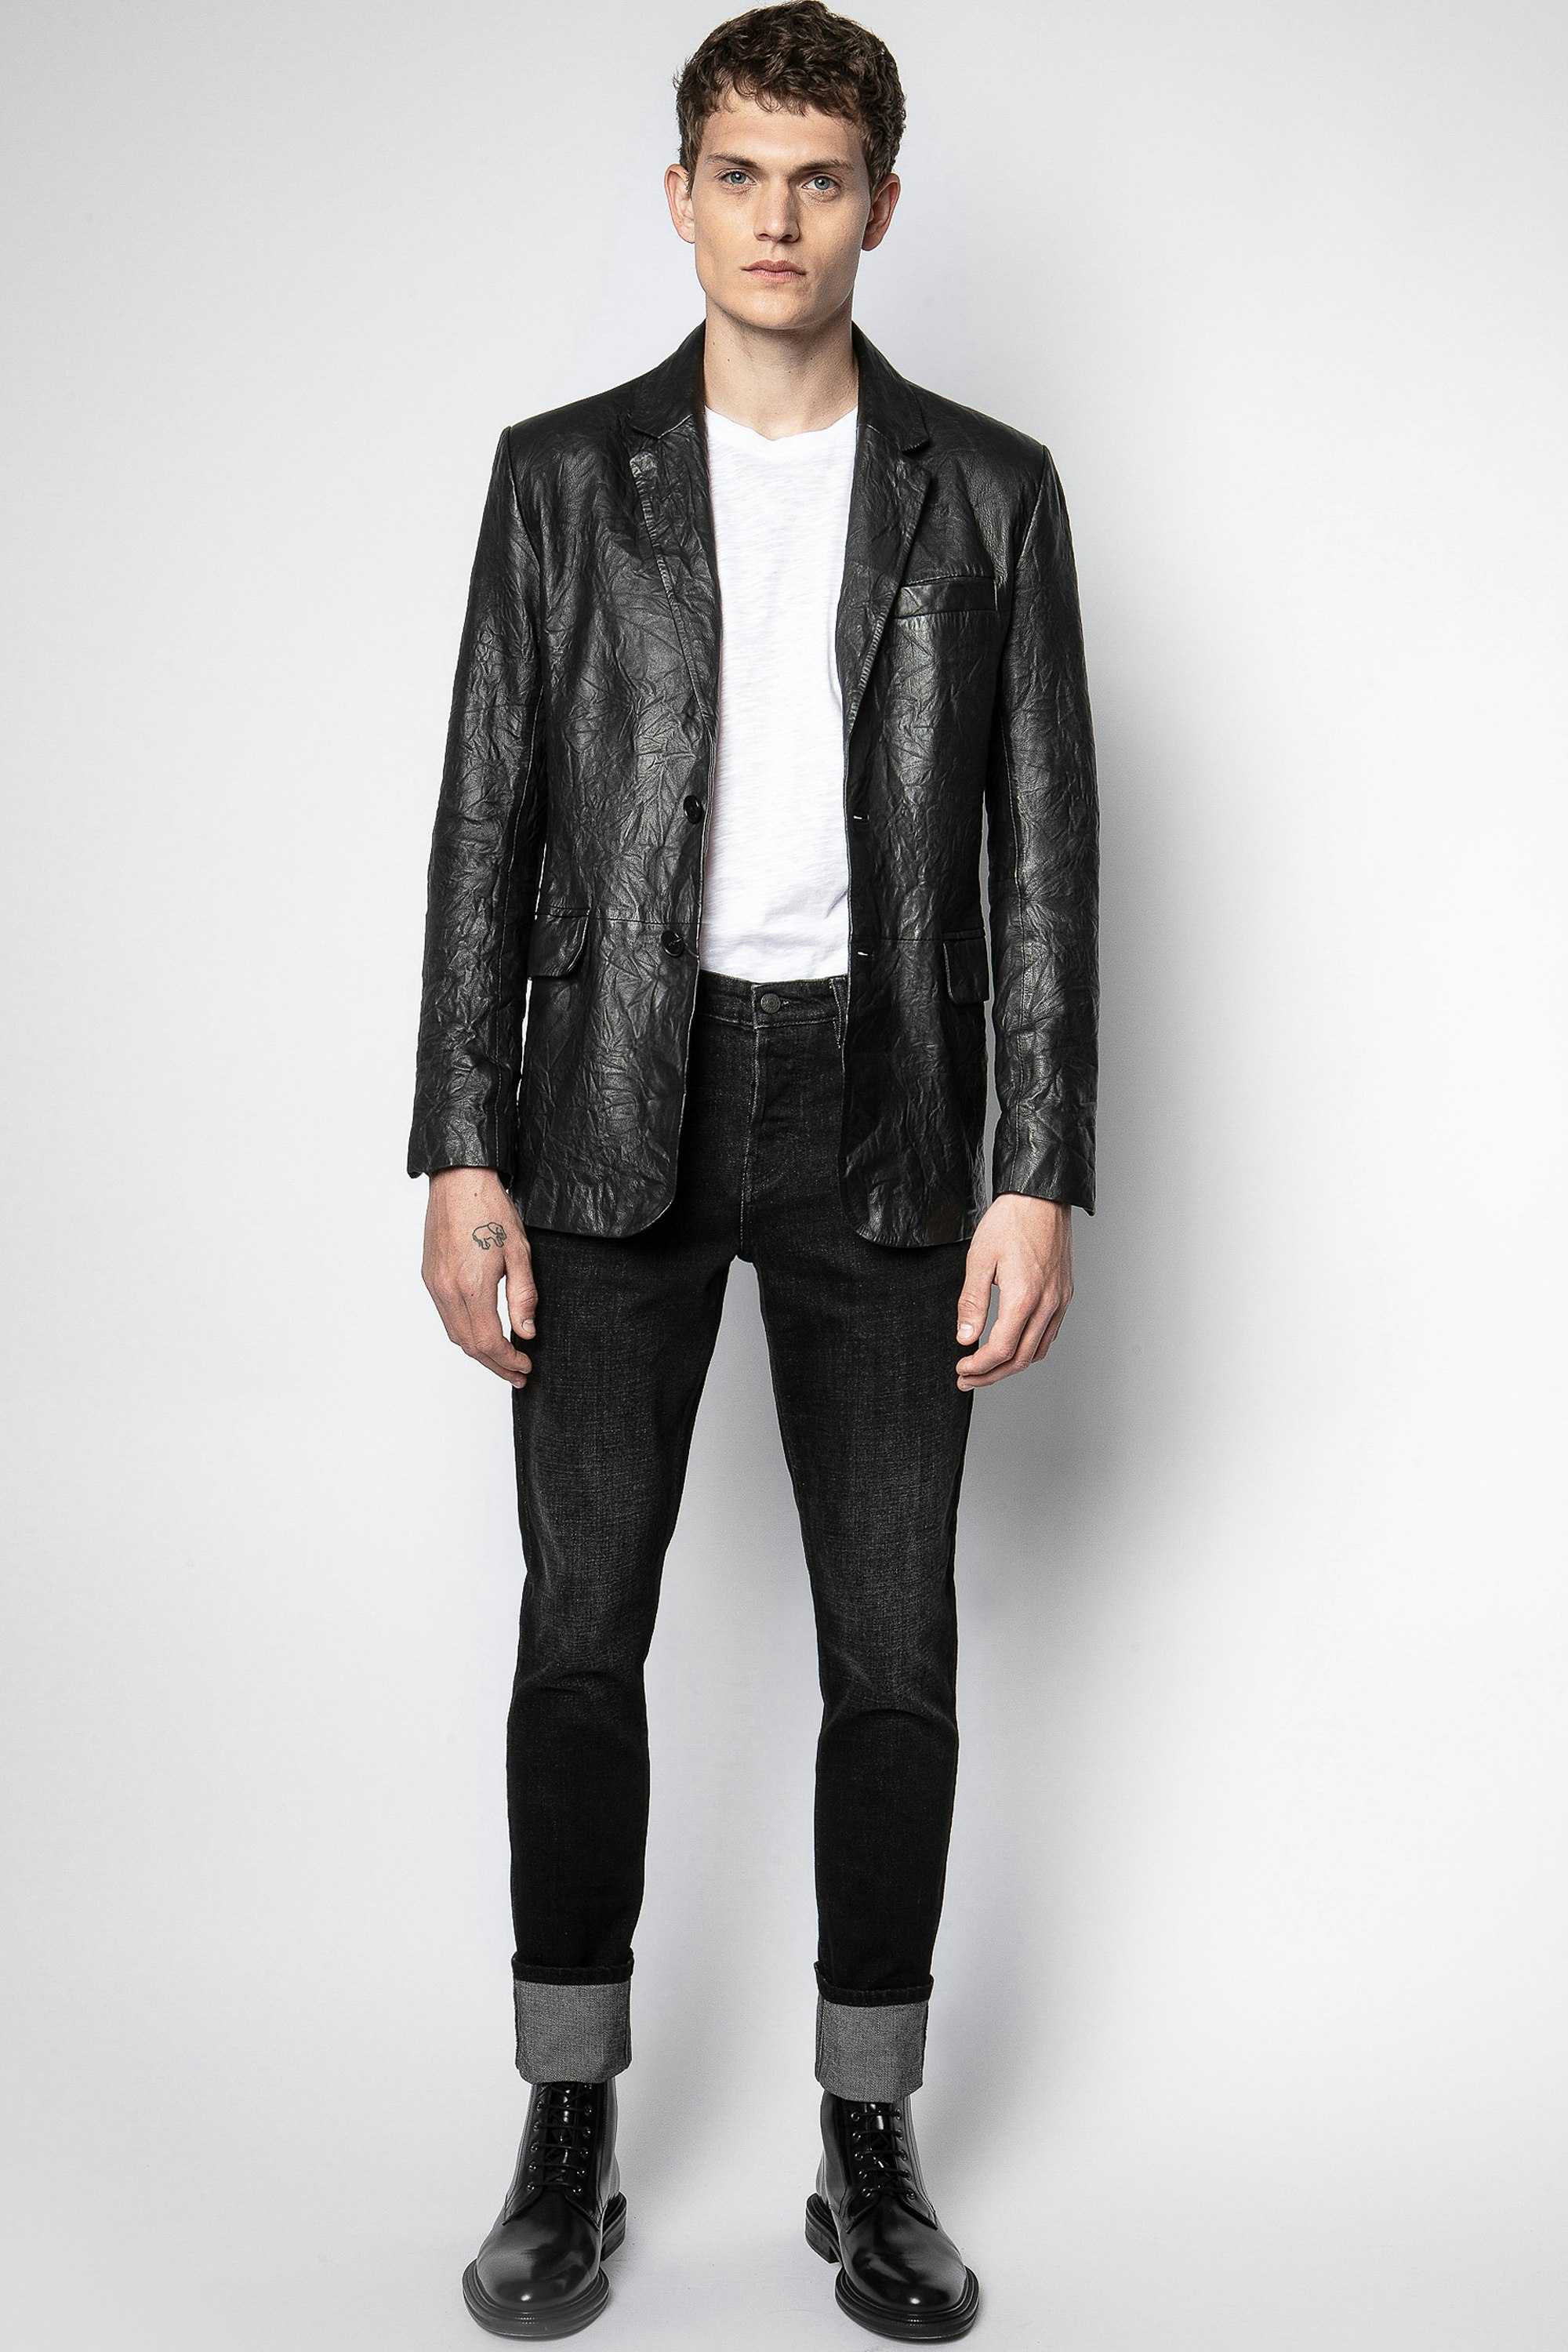 Jacke Valfried Crinkle Leather - Zadig & Voltaire